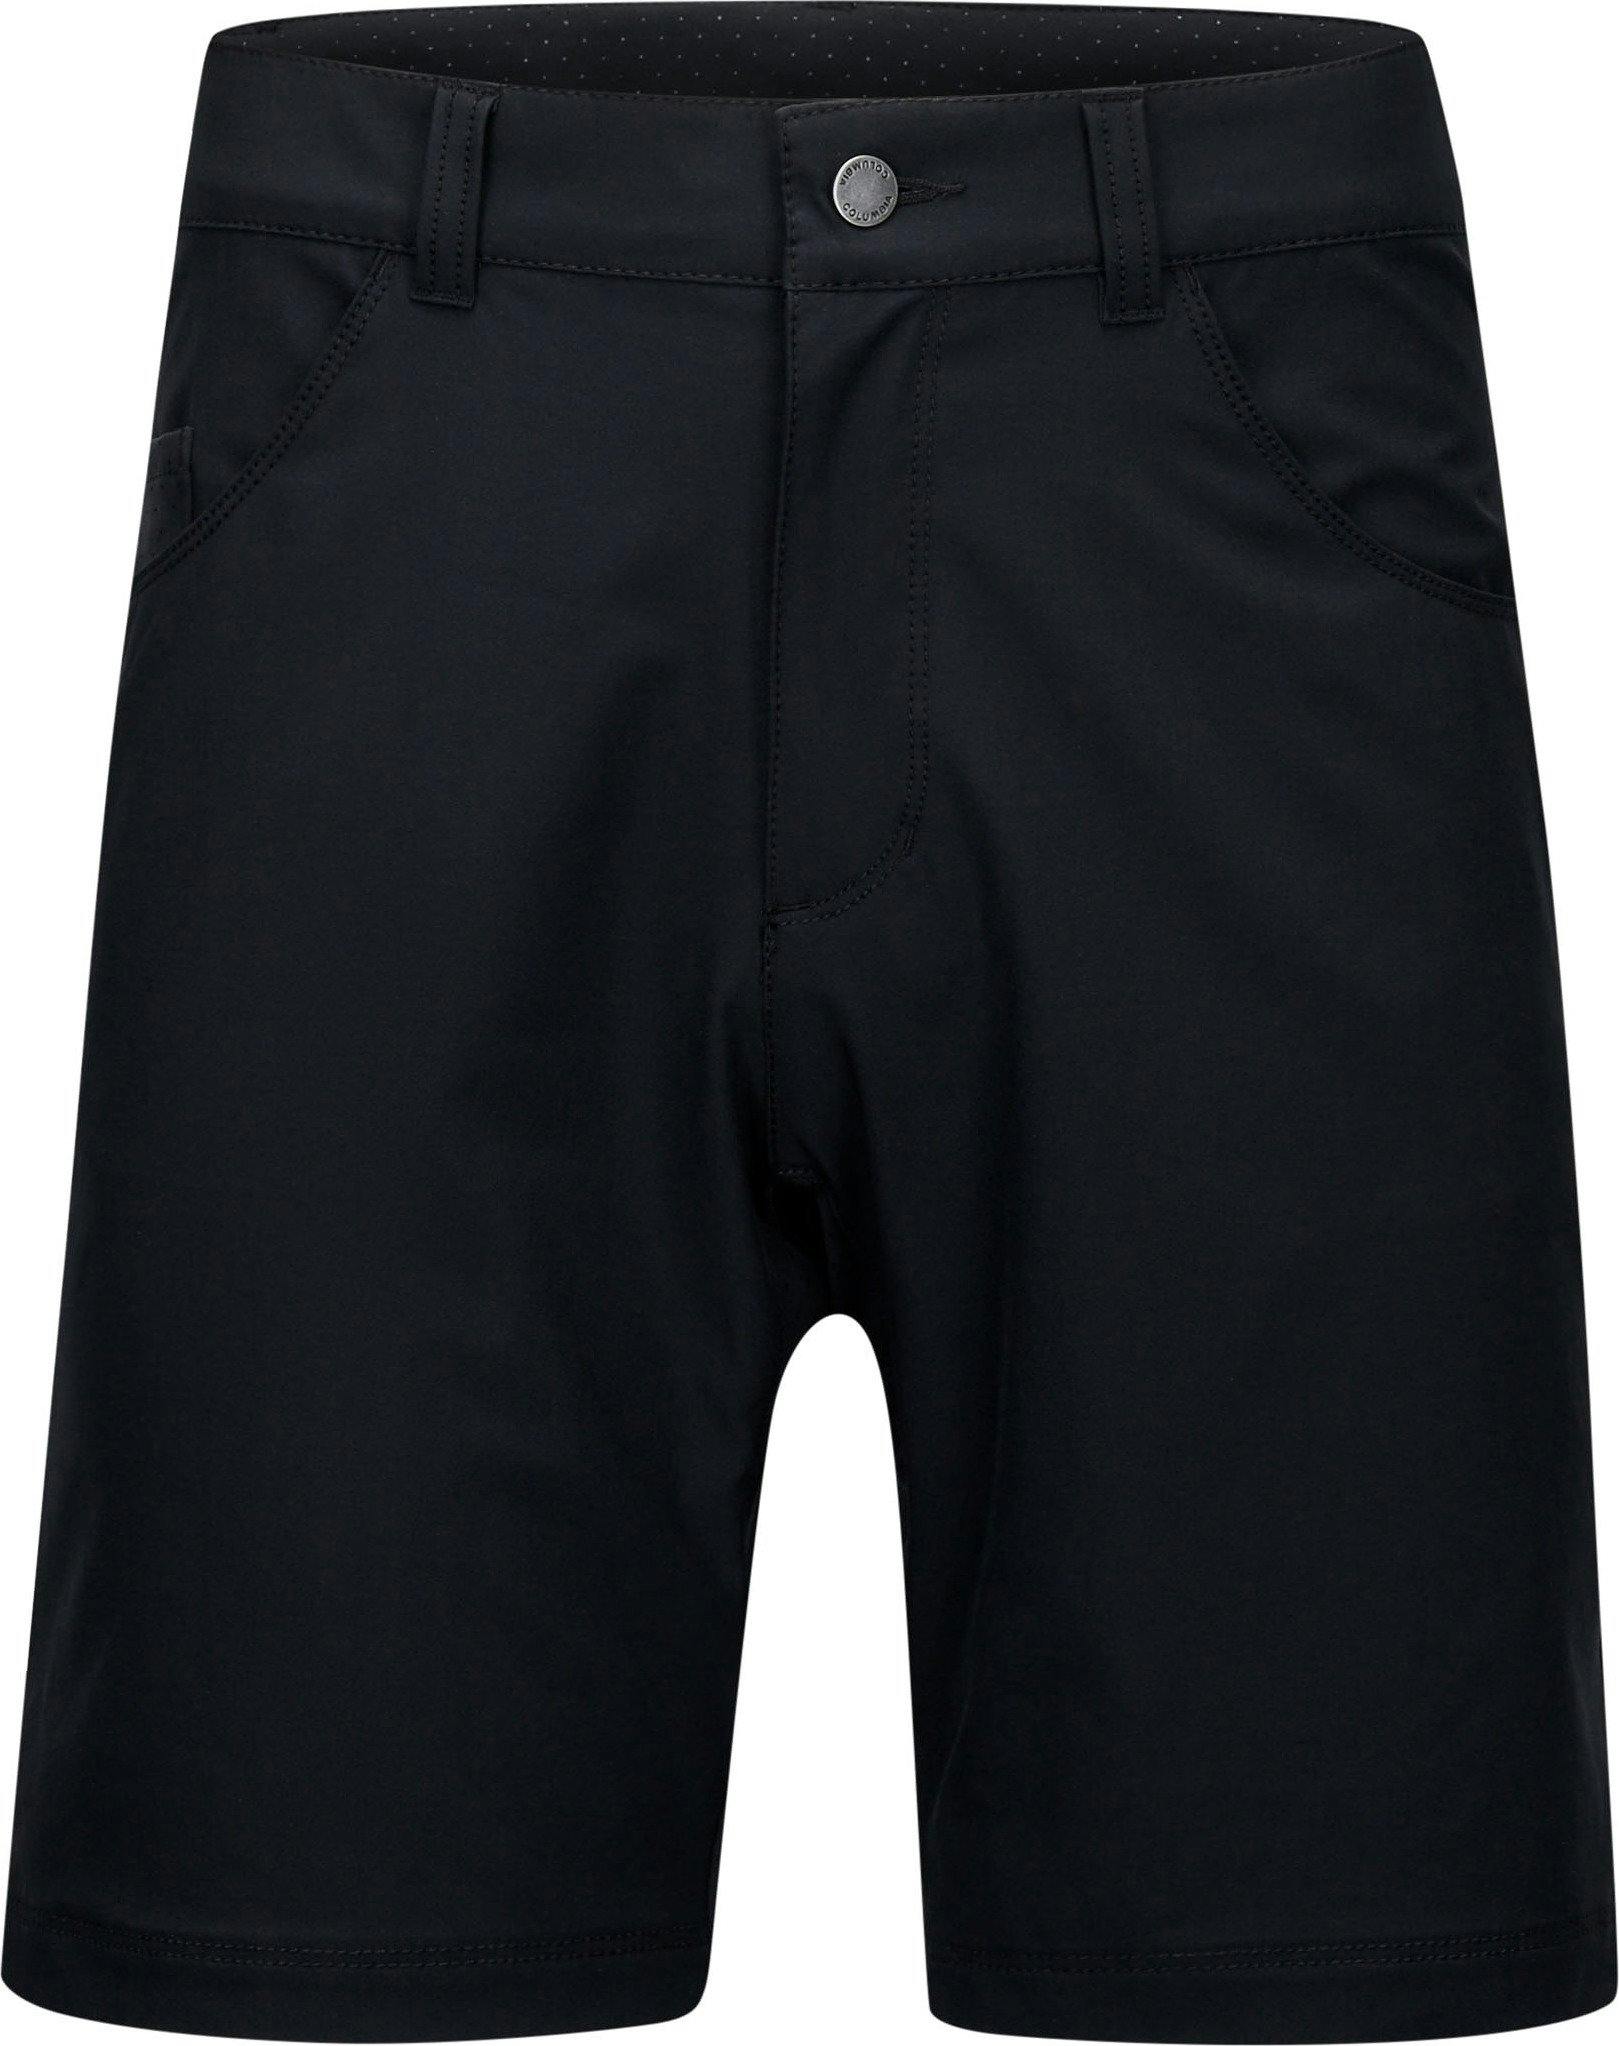 Product image for Outdoor Elements 5 Pkt Short - Men's